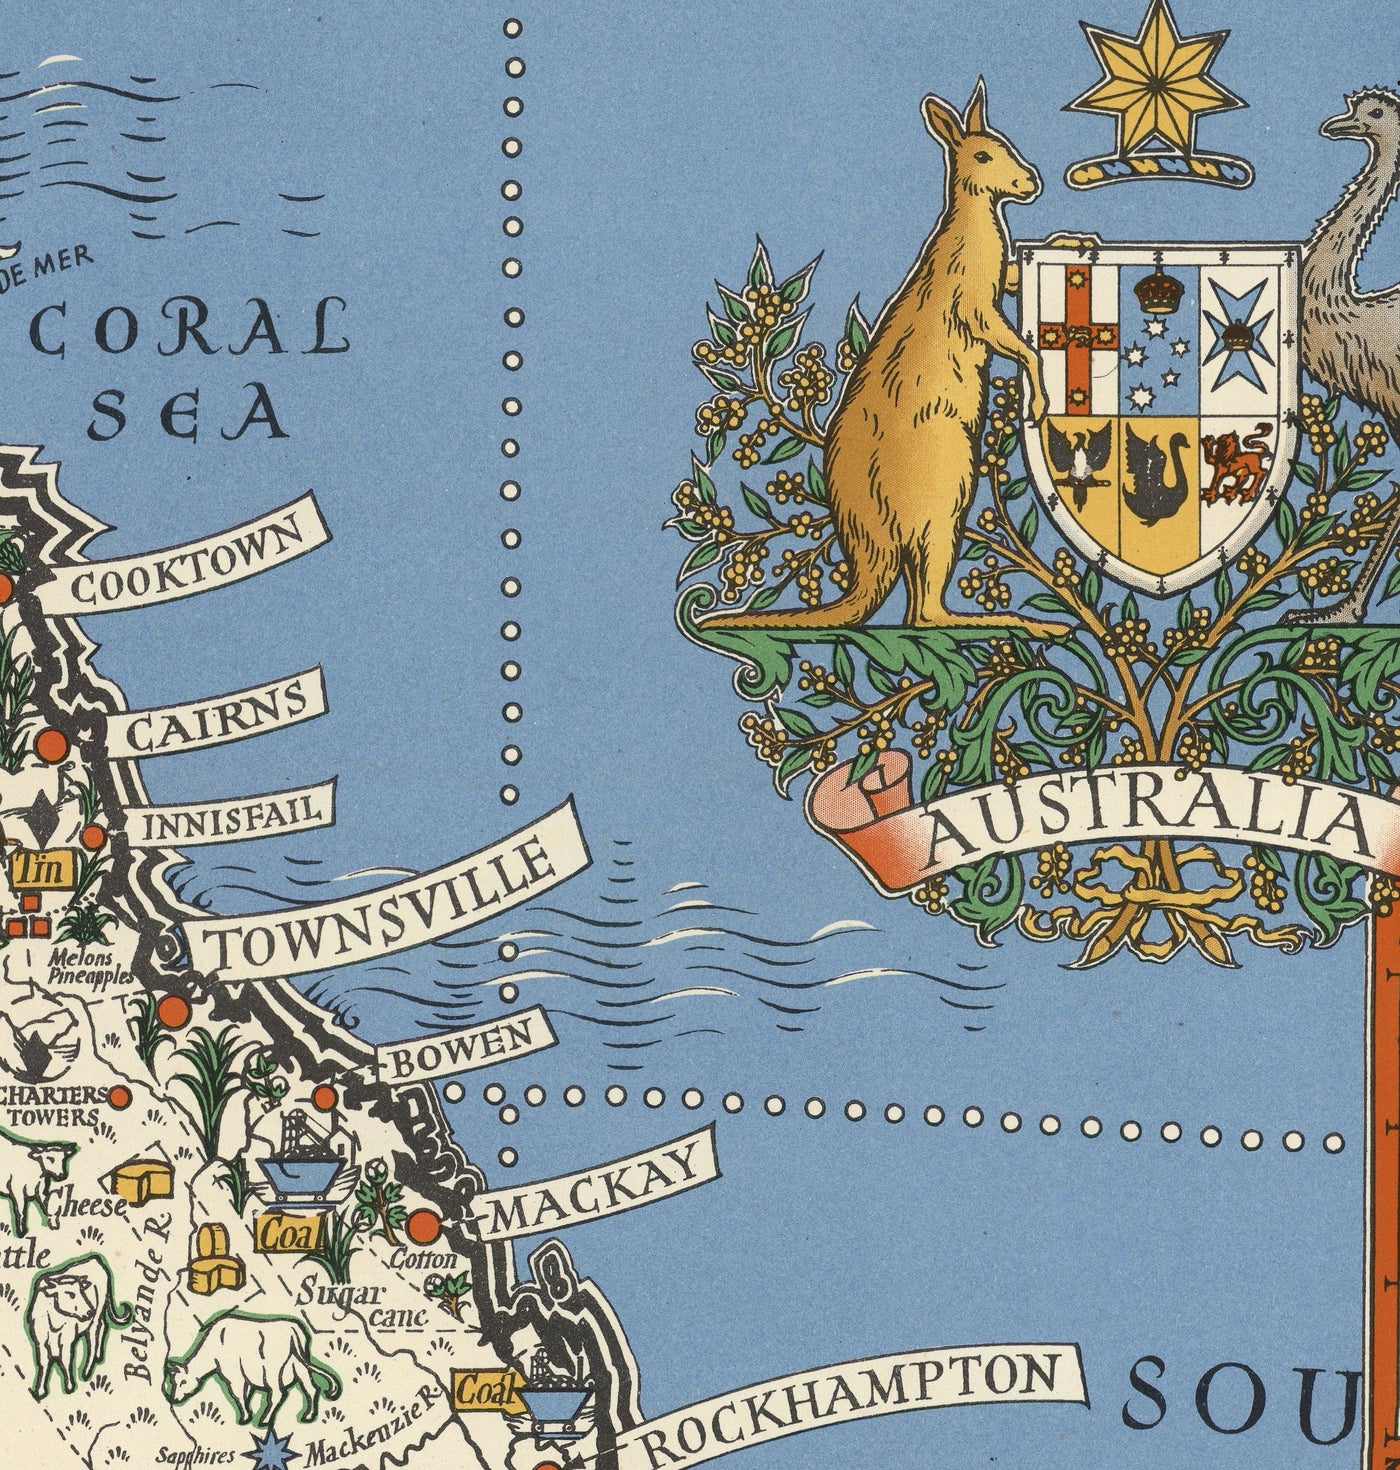 Old Map of Australia, 1942 by Max Gill - World War 2 Map of Natural & Industrial Resources